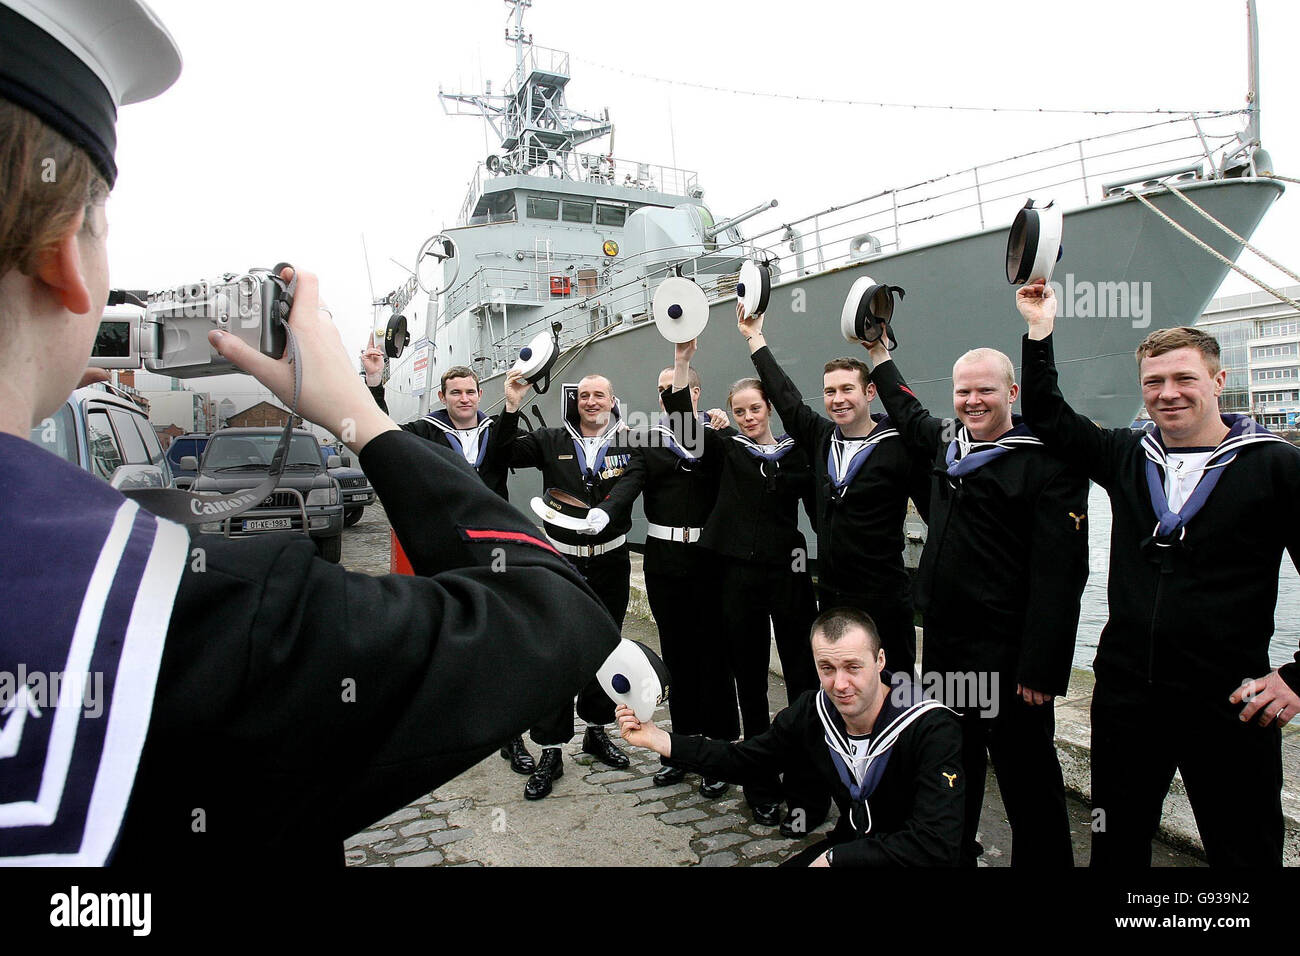 Communications Officer Tracie Wilkes photographs sailors from the Irish Naval Vessel LE Eithne in Dublin, Wednesday January 18, 2006, after it was announced that they are being deployed to South America. Commander Mark Mellet will be taking the LE Eithne's helm on next month's voyage to South America where Admiral William Brown's defence of Argentina's shores in 1814 made him a national hero. See PA Story SOCIAL Argentina Ireland. PRESS ASSOCIATION Photo. Photo credit should read: Julien Behal/PA Stock Photo